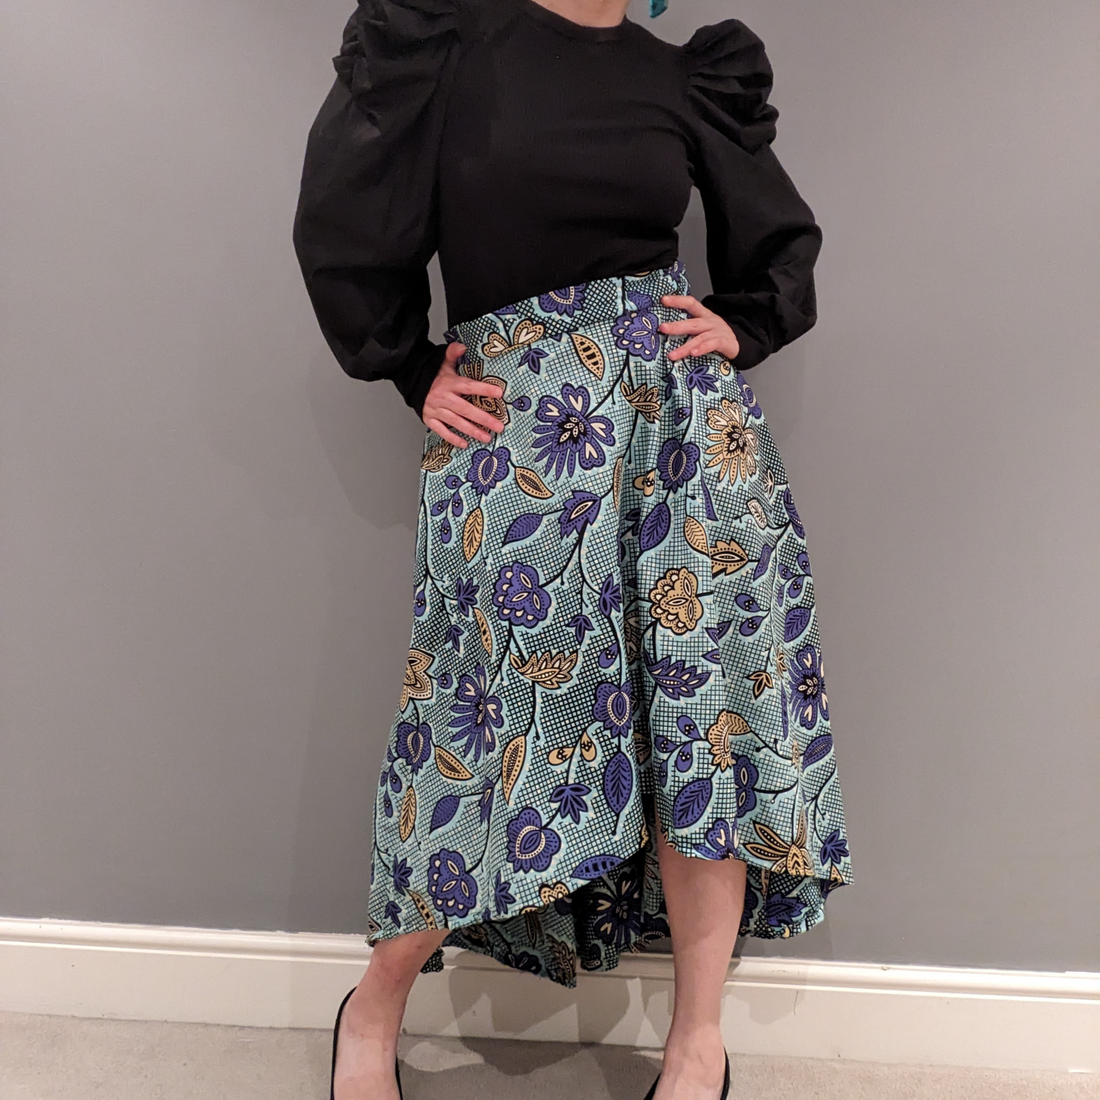 Dovetailed London's brand ambassador wearing a self drafted skirt in African wax print from Dovetailed London